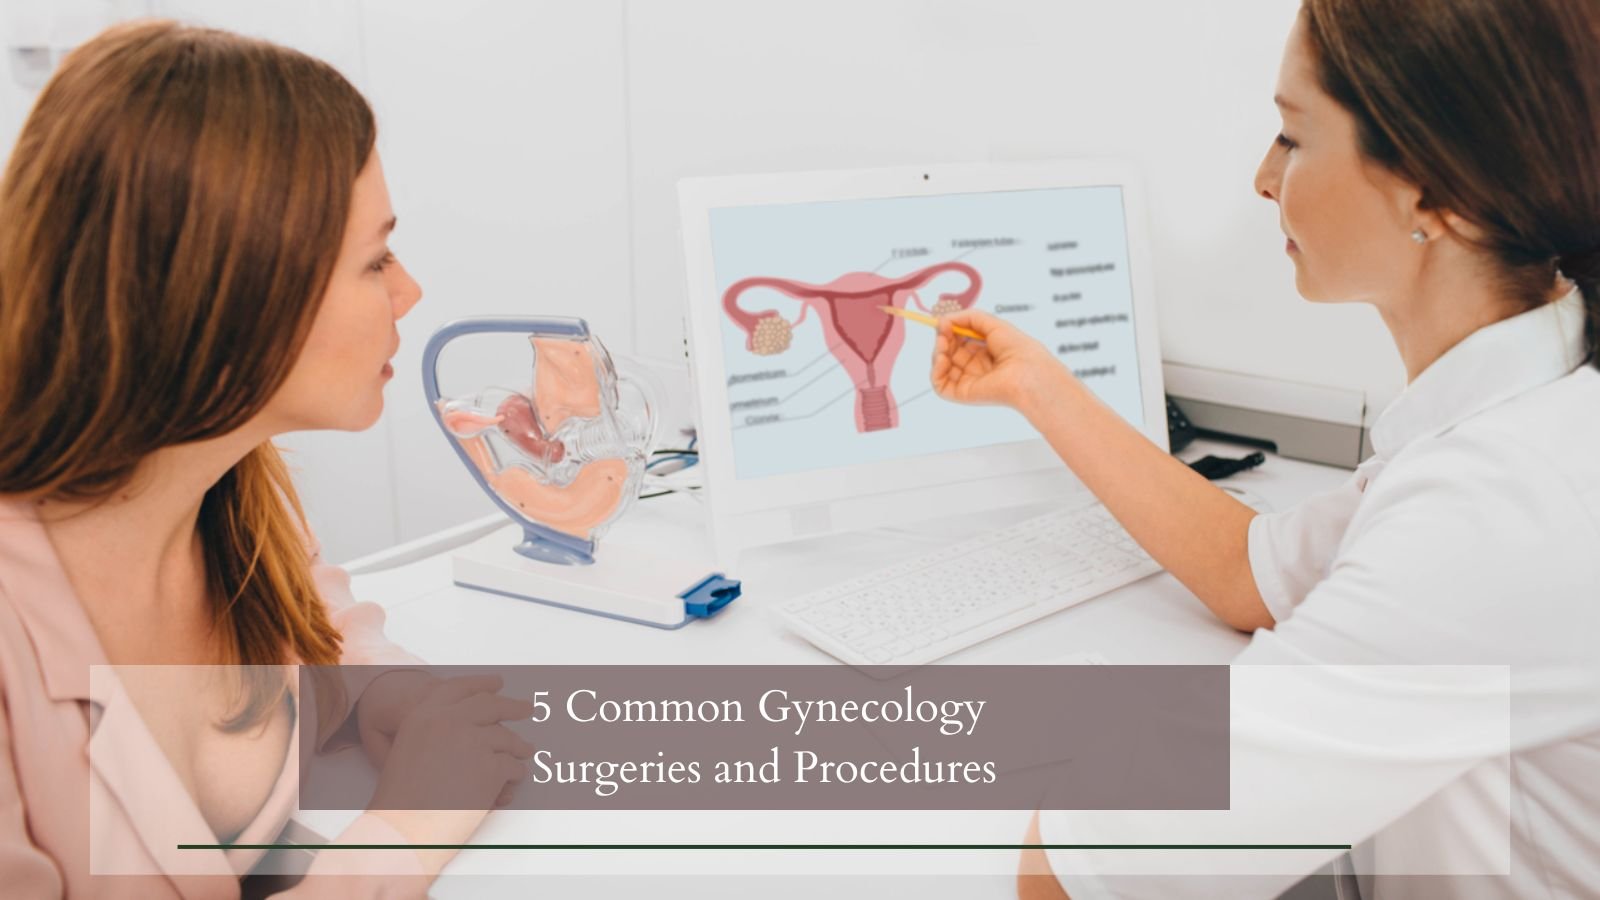 5 Common Gynecology Surgeries and Procedures